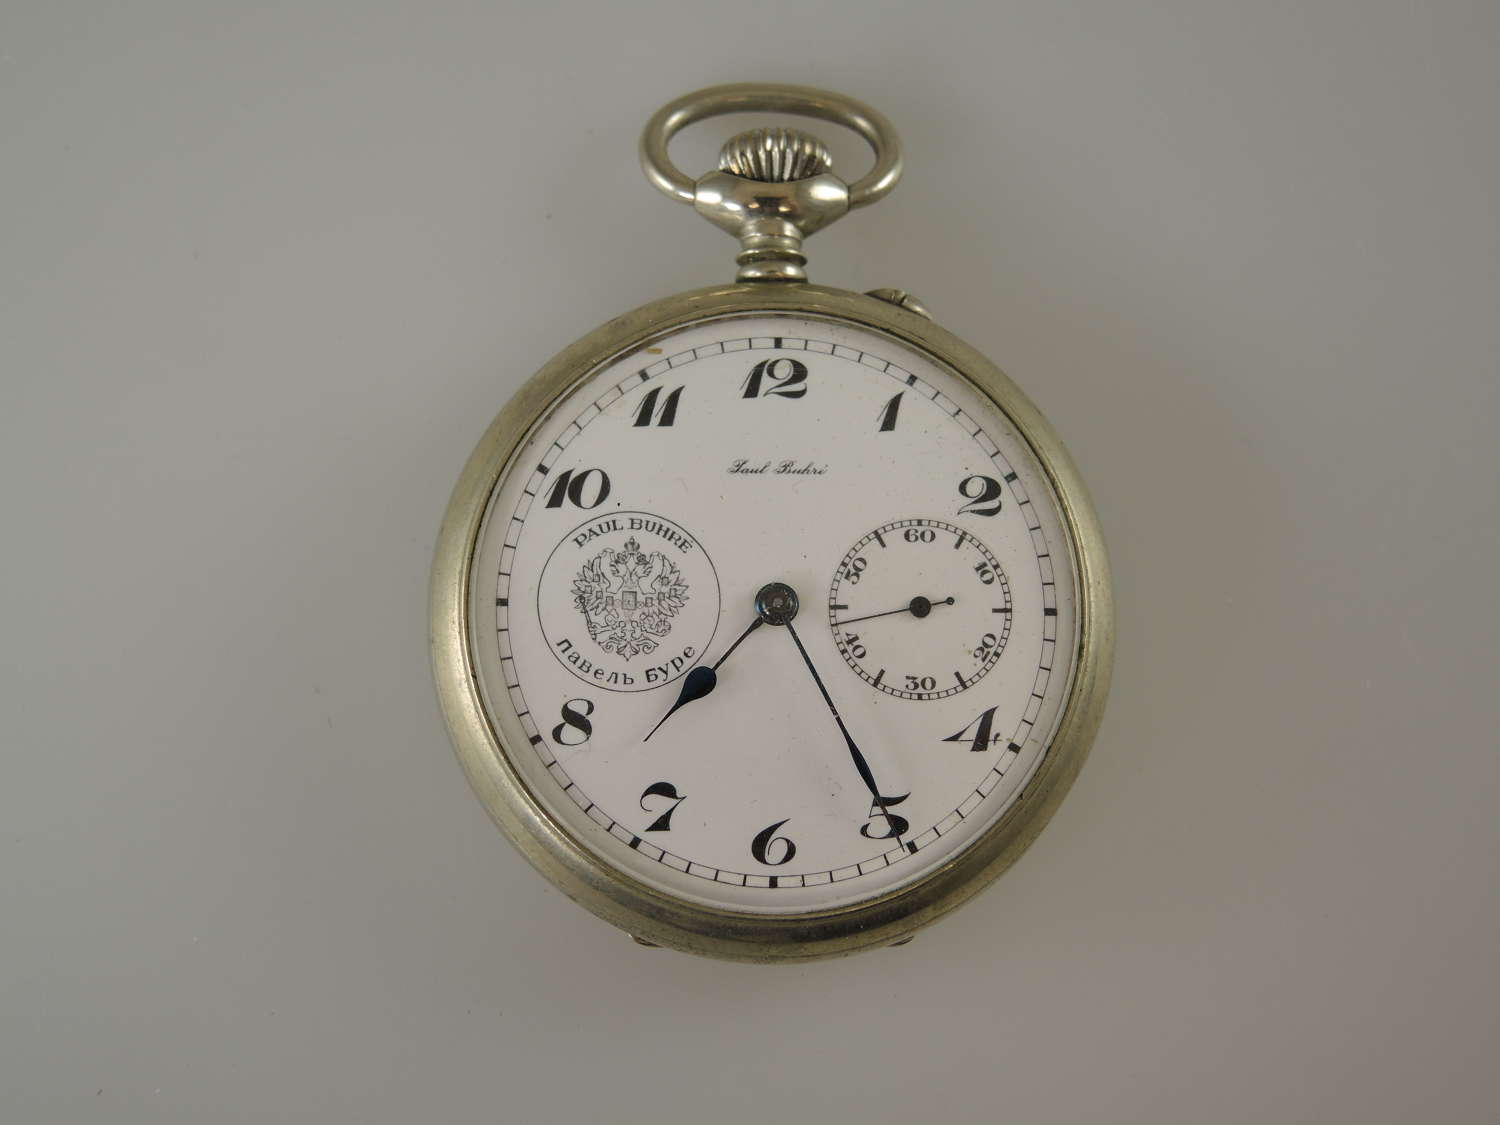 Rare Russian pocket watch by Paul Buhre c1900